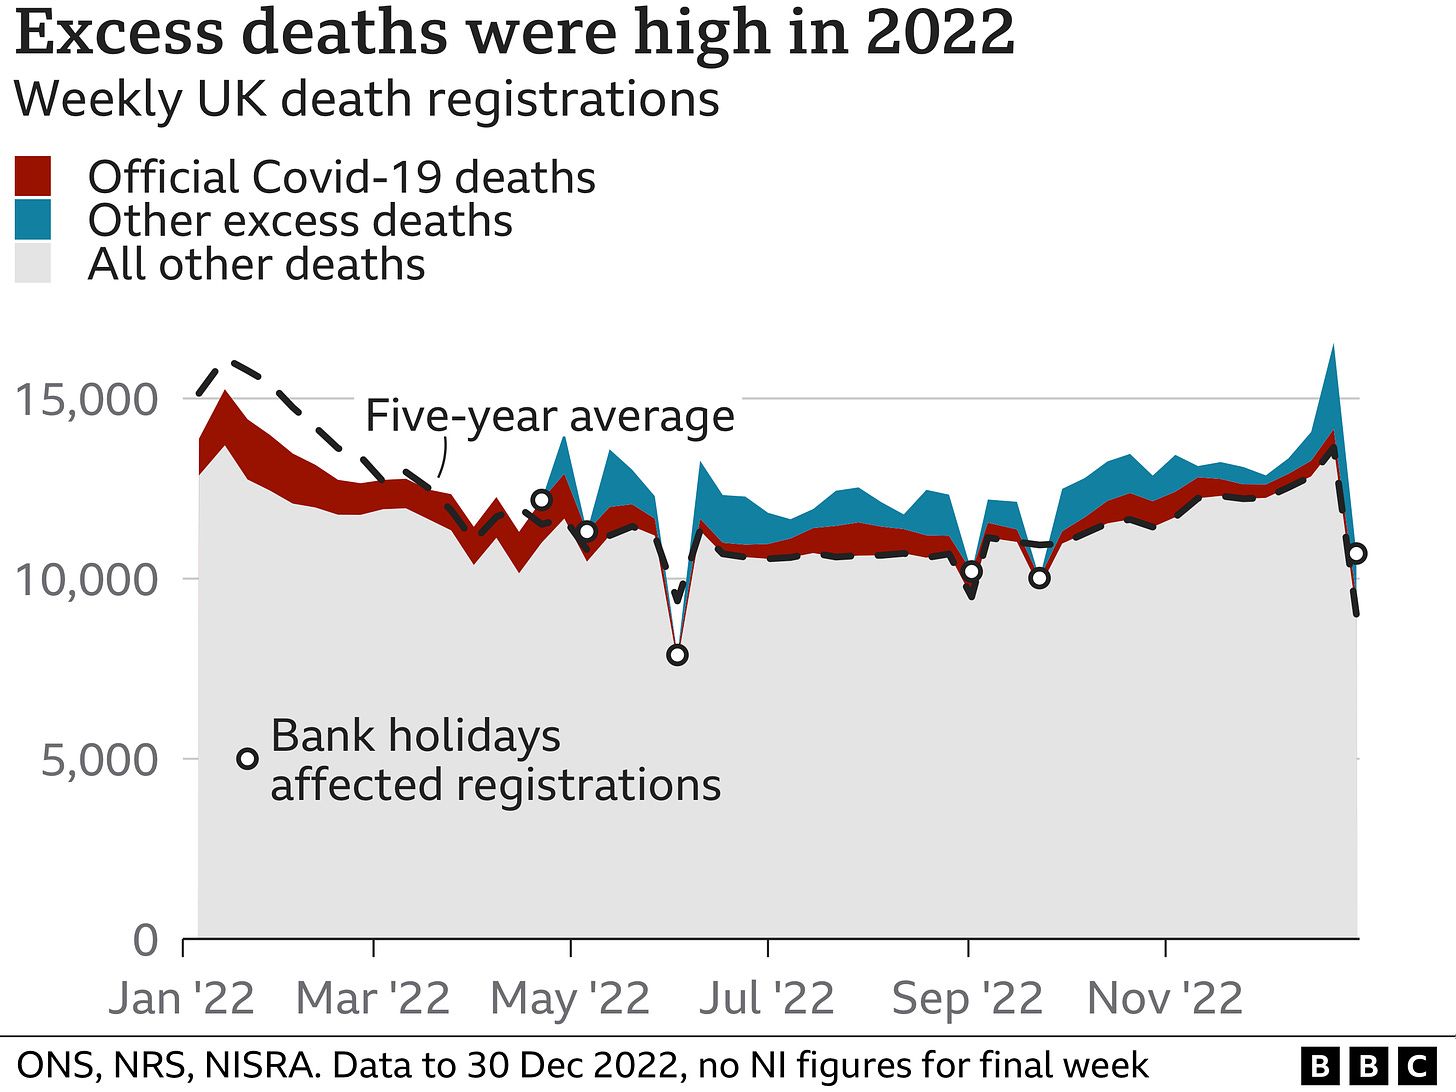 Chart showing deaths reported each week in 2022. More deaths than expected were registered consistently through the second half of the year, with Covid only accounting for a portion of that excess.